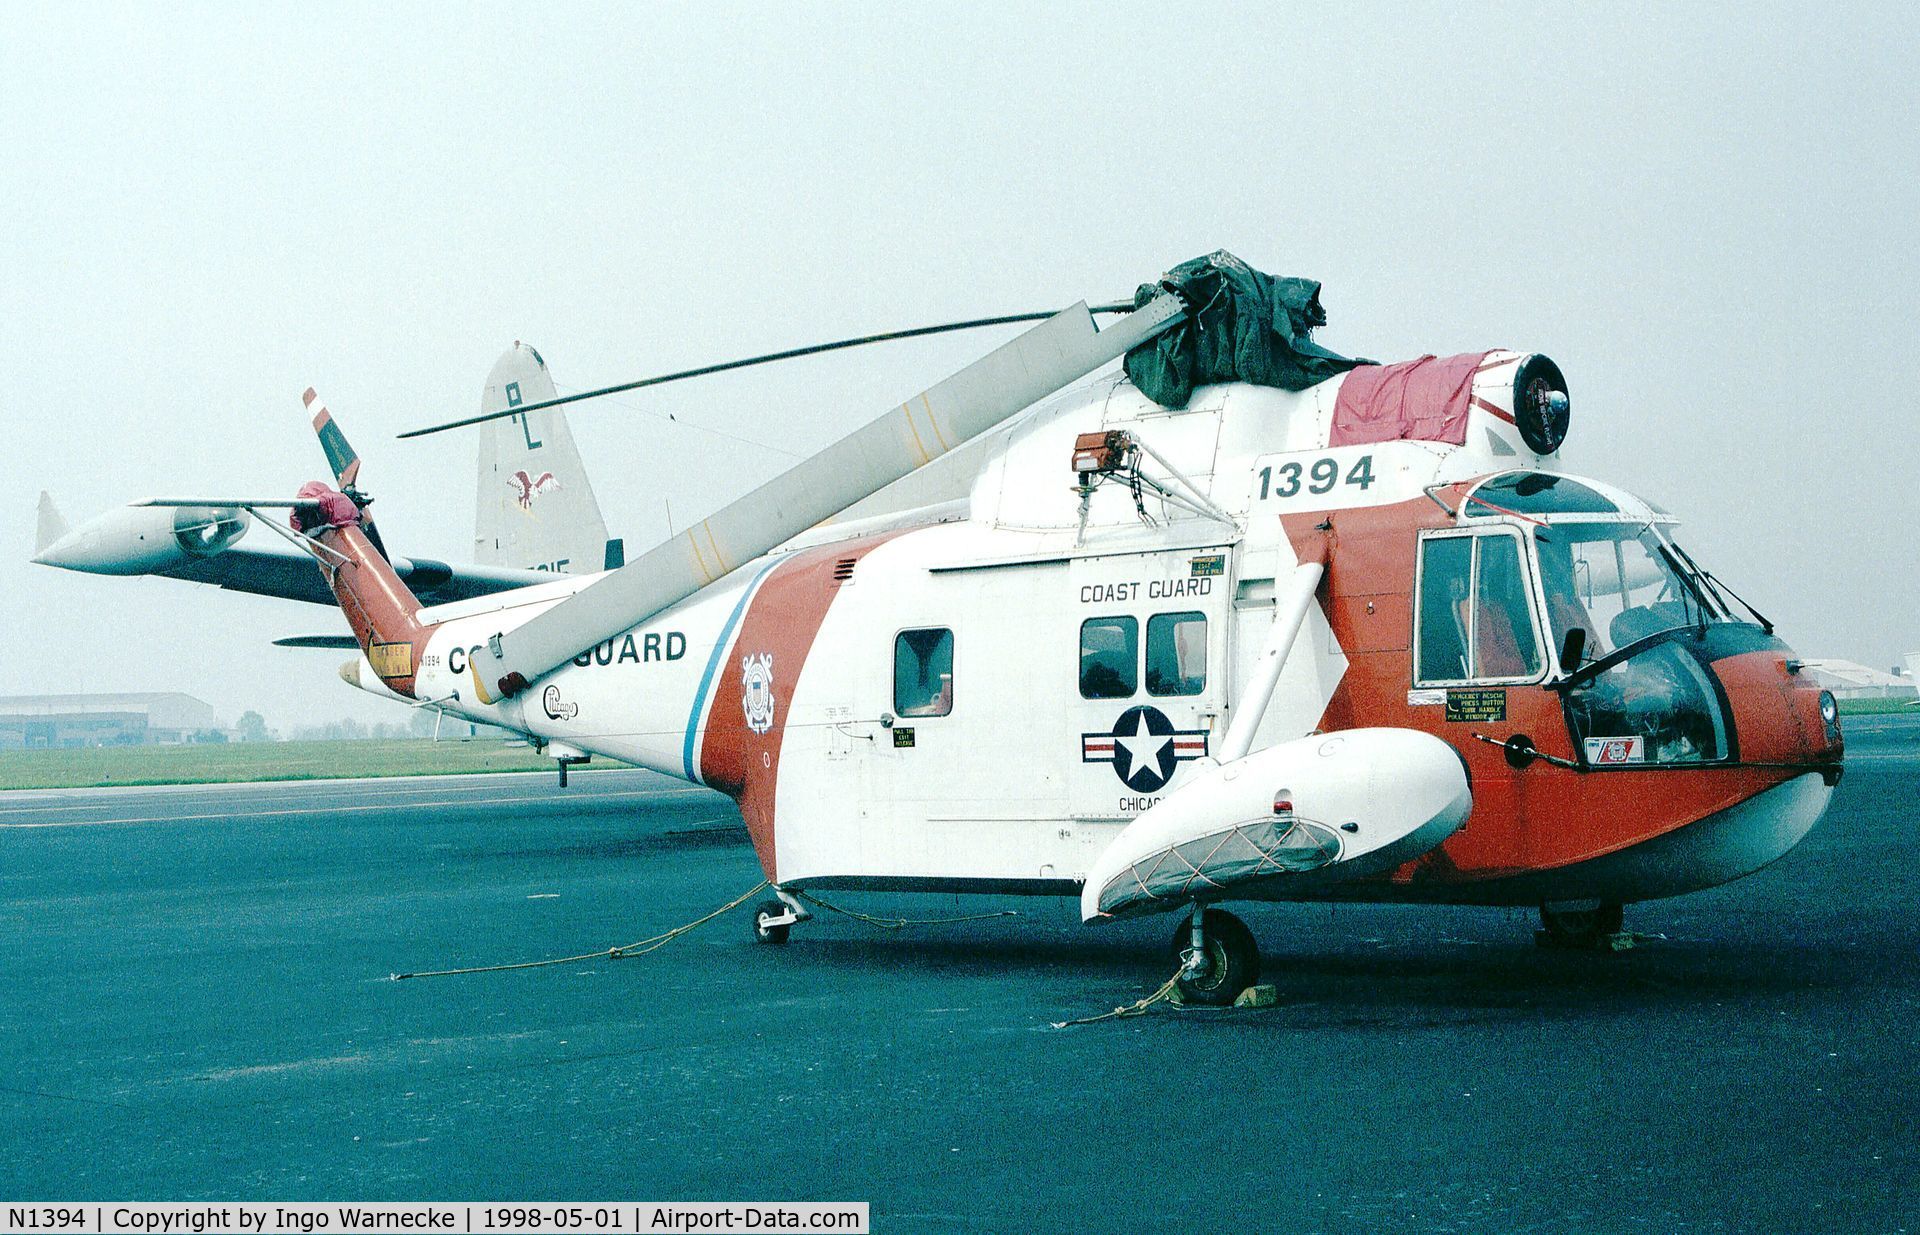 N1394, 1964 Sikorsky HH-52A Sea Guard C/N 62.075, Sikorsky HH-52A of USCG at the Mid Atlantic Air Museum, Reading PA